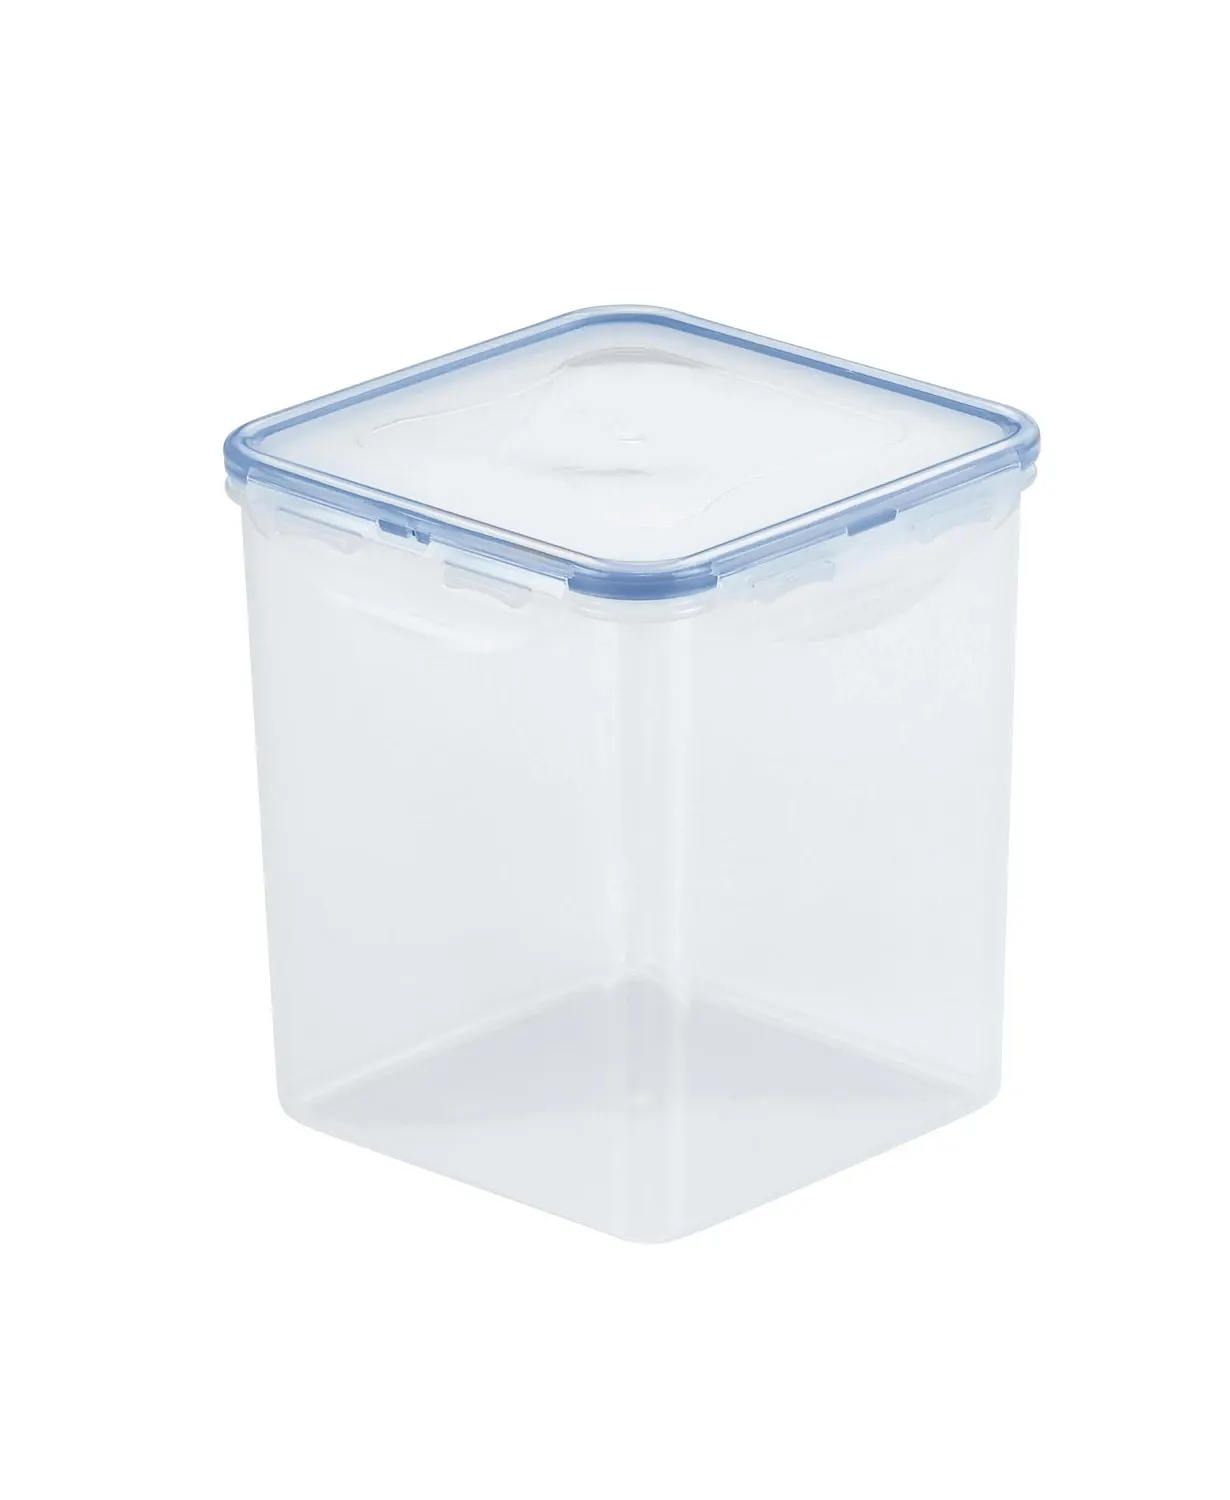 http://cdn.apartmenttherapy.info/image/upload/v1634310924/Lock%20n%20Lock%20Easy%20Essentials%20Square%2011-Cup%20Sugar%20Storage%20Container.webp